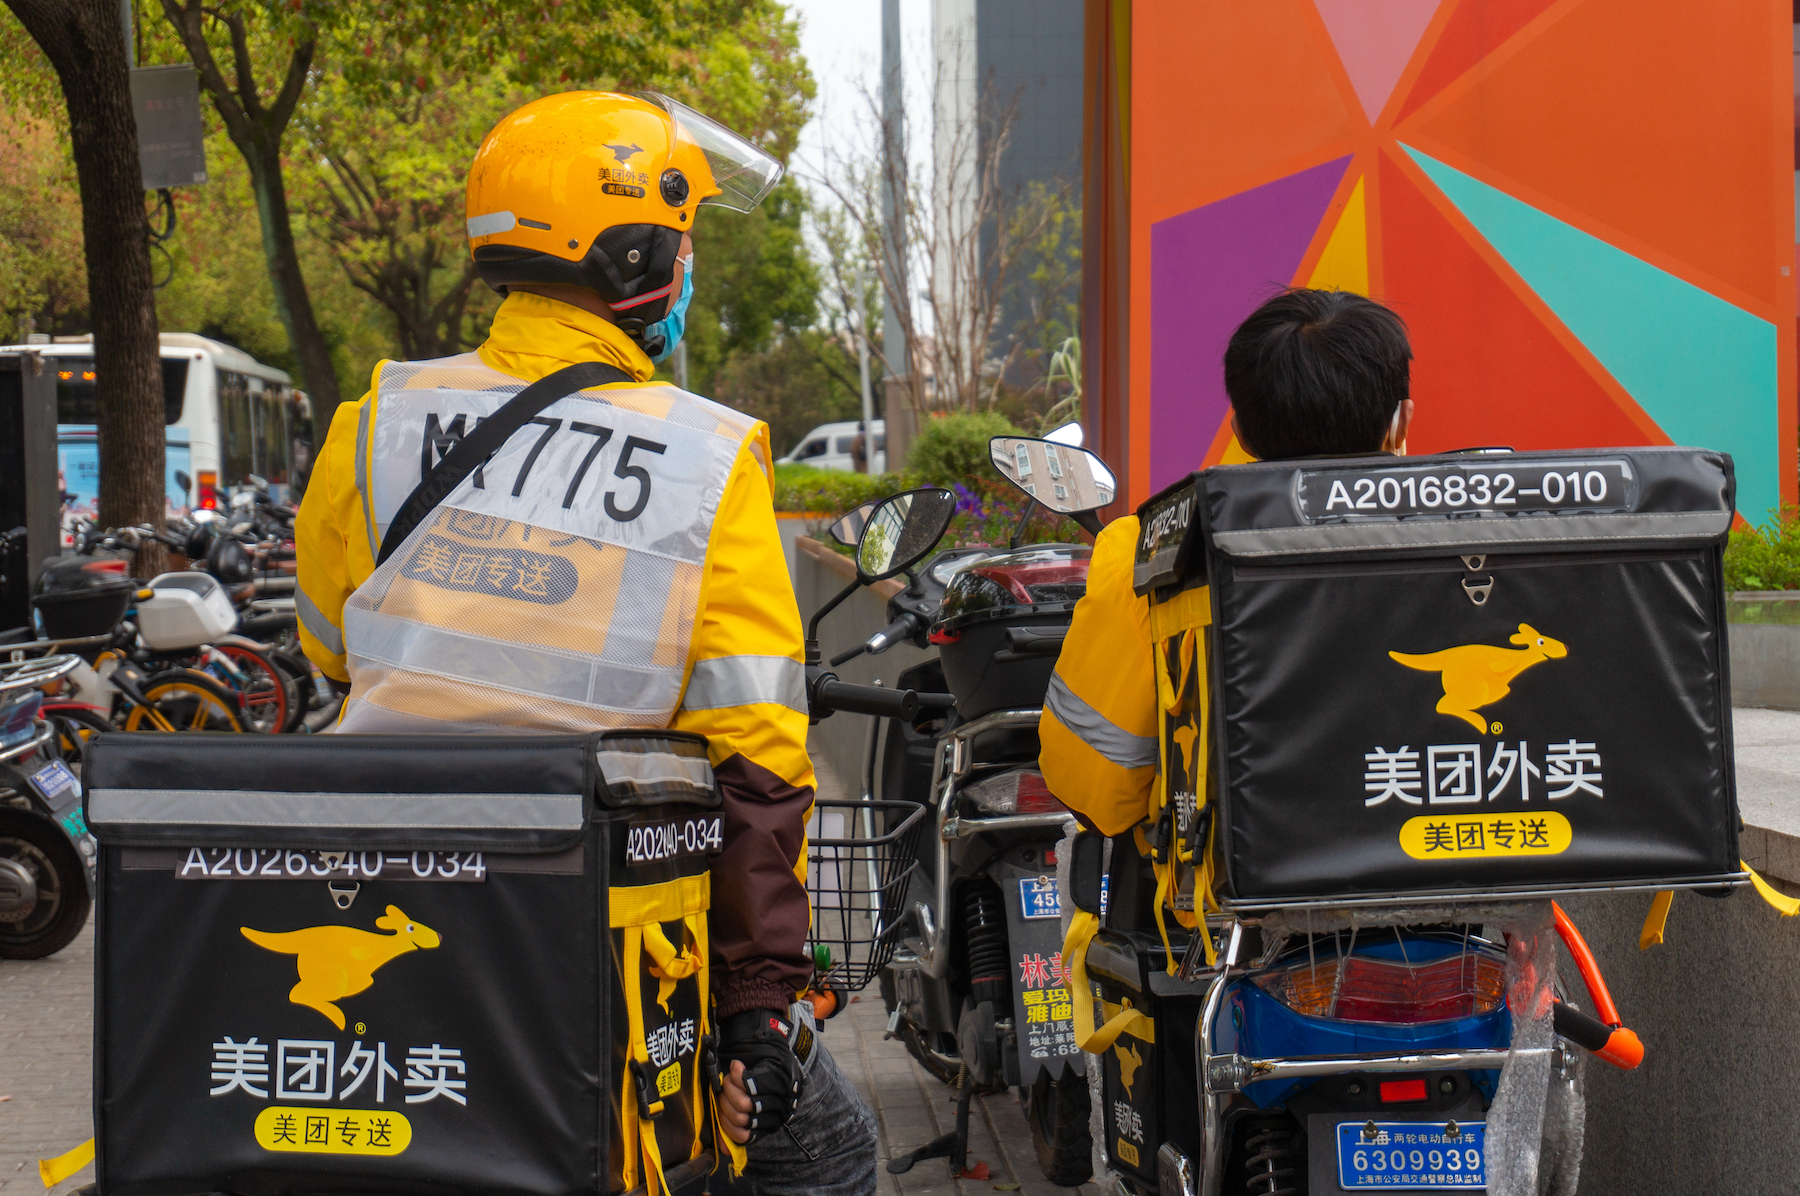 Two Meituan delivery riders sit on their bikes